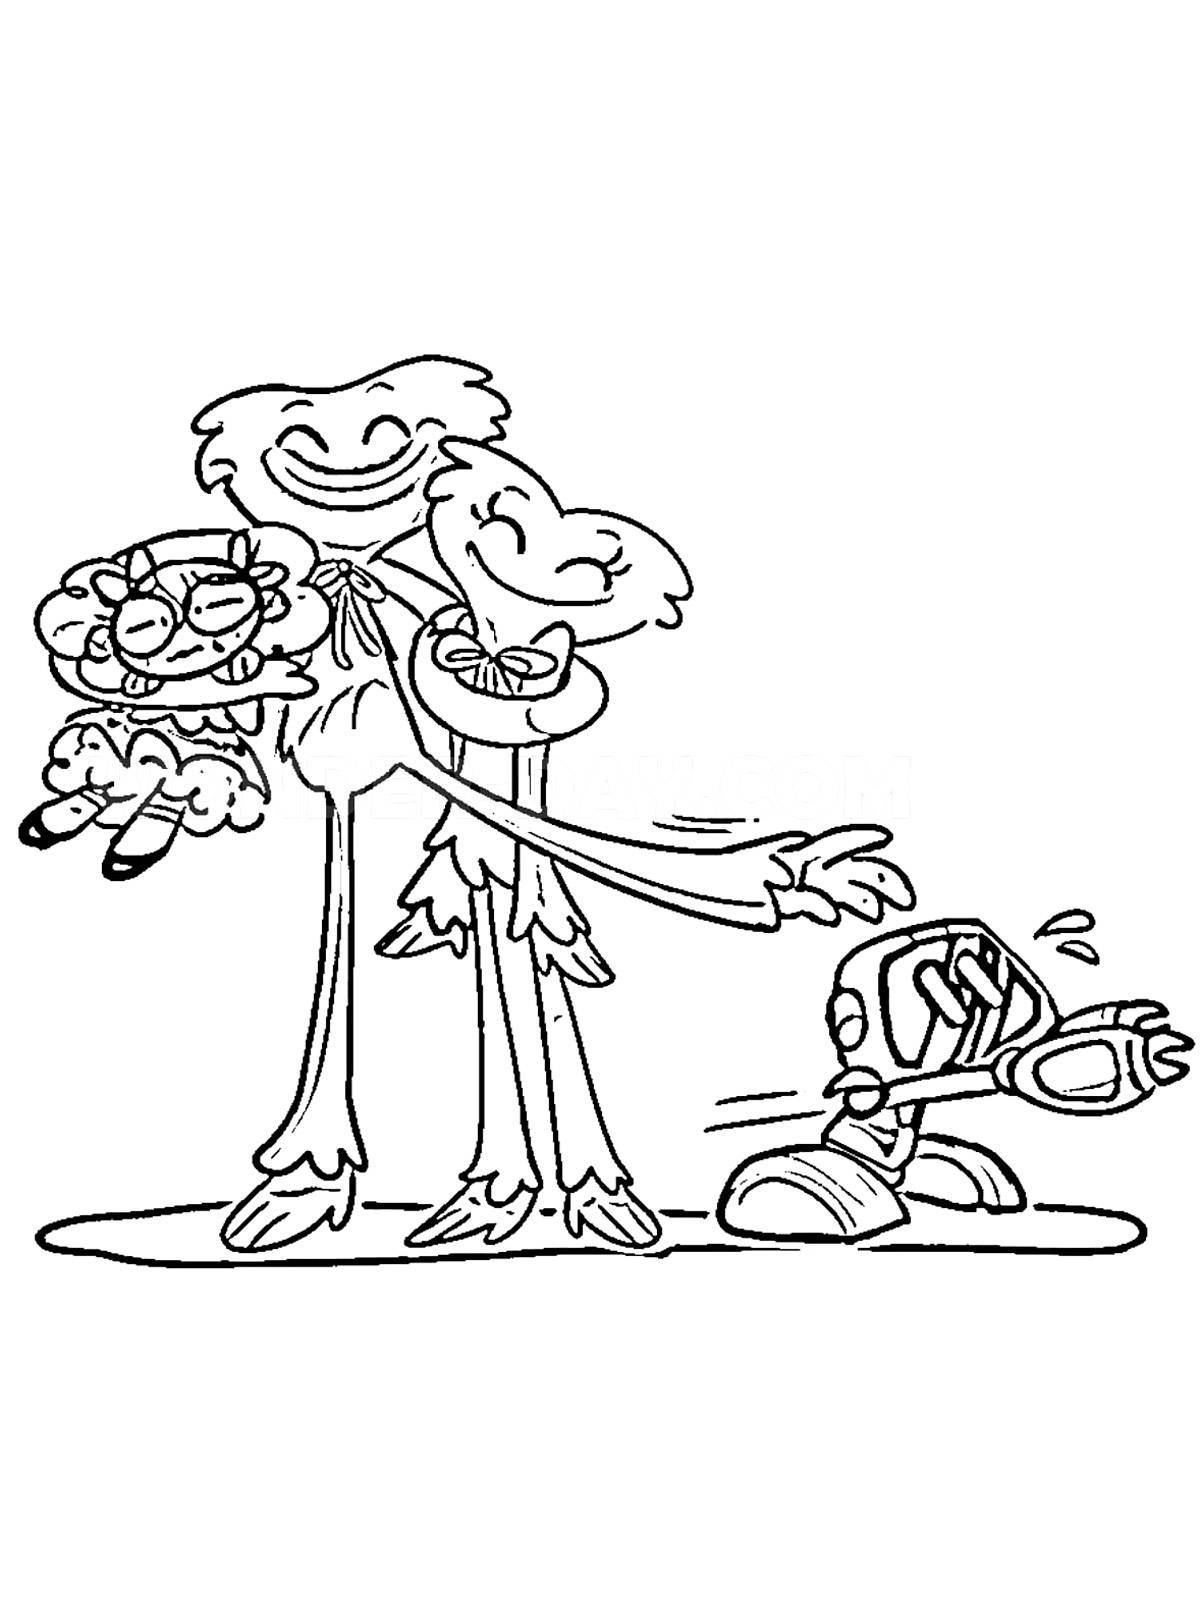 Playful tilly willy coloring page